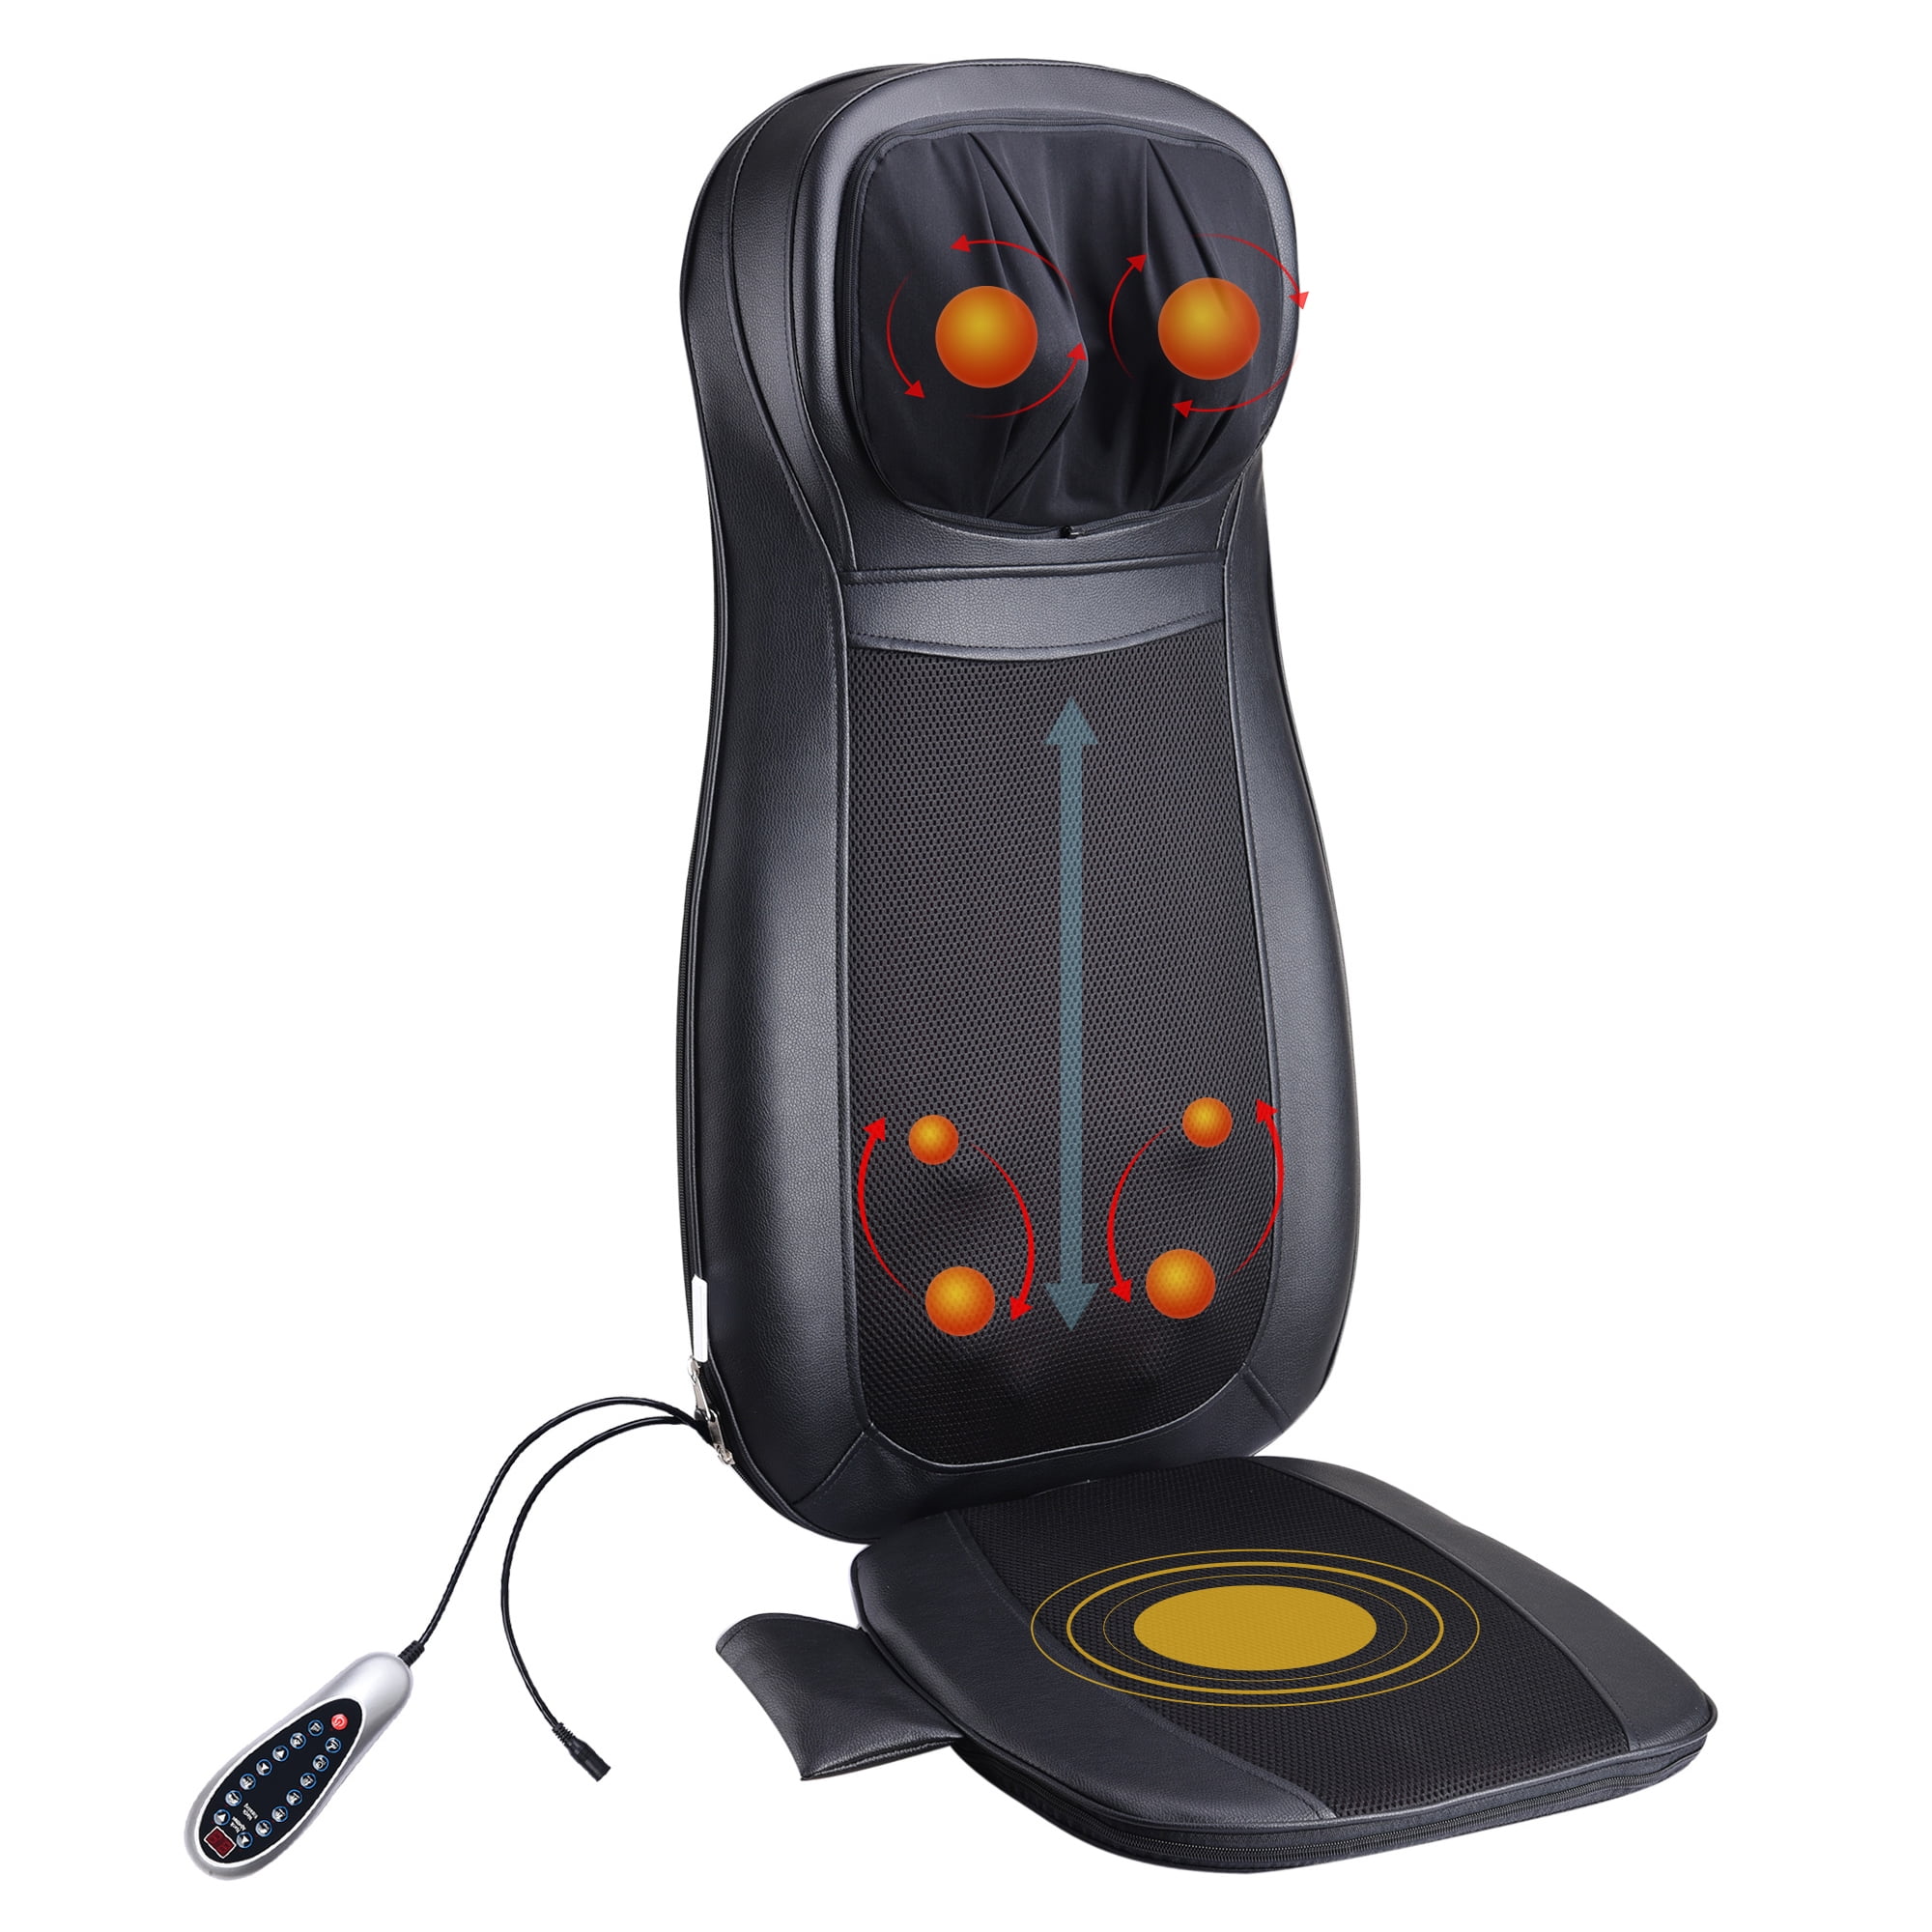 Switory Heated Car Seat Back Massage Cushion Back Massager with Heat,5 Vibration Massage Nodes & 3 Heating Pad with Intelligent Temperature Controller Winter Universial Car Seat Warmer 